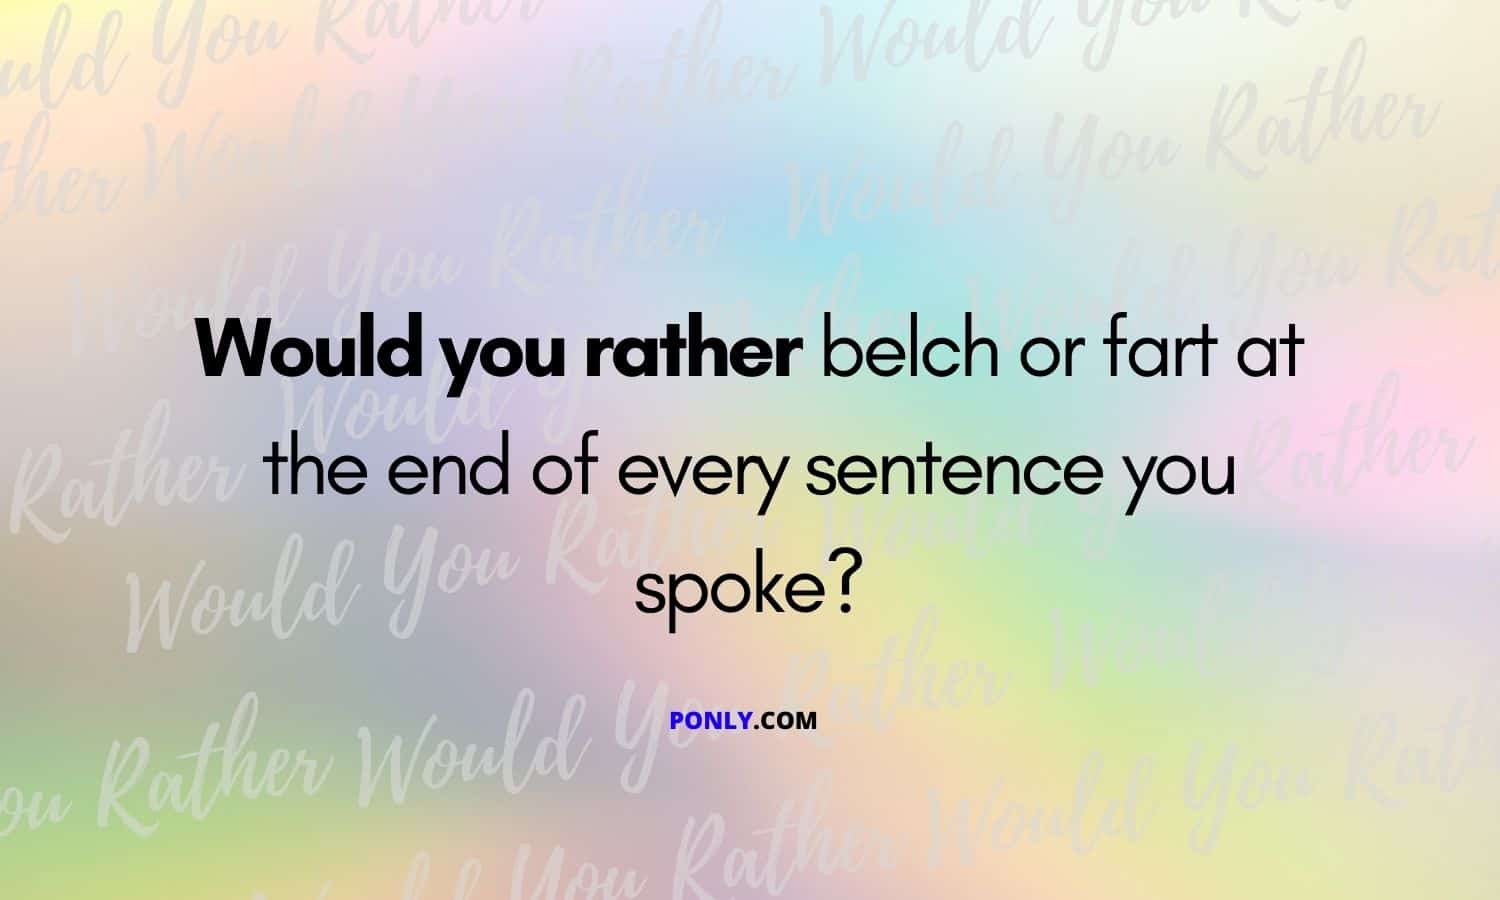 fun would you rather questions